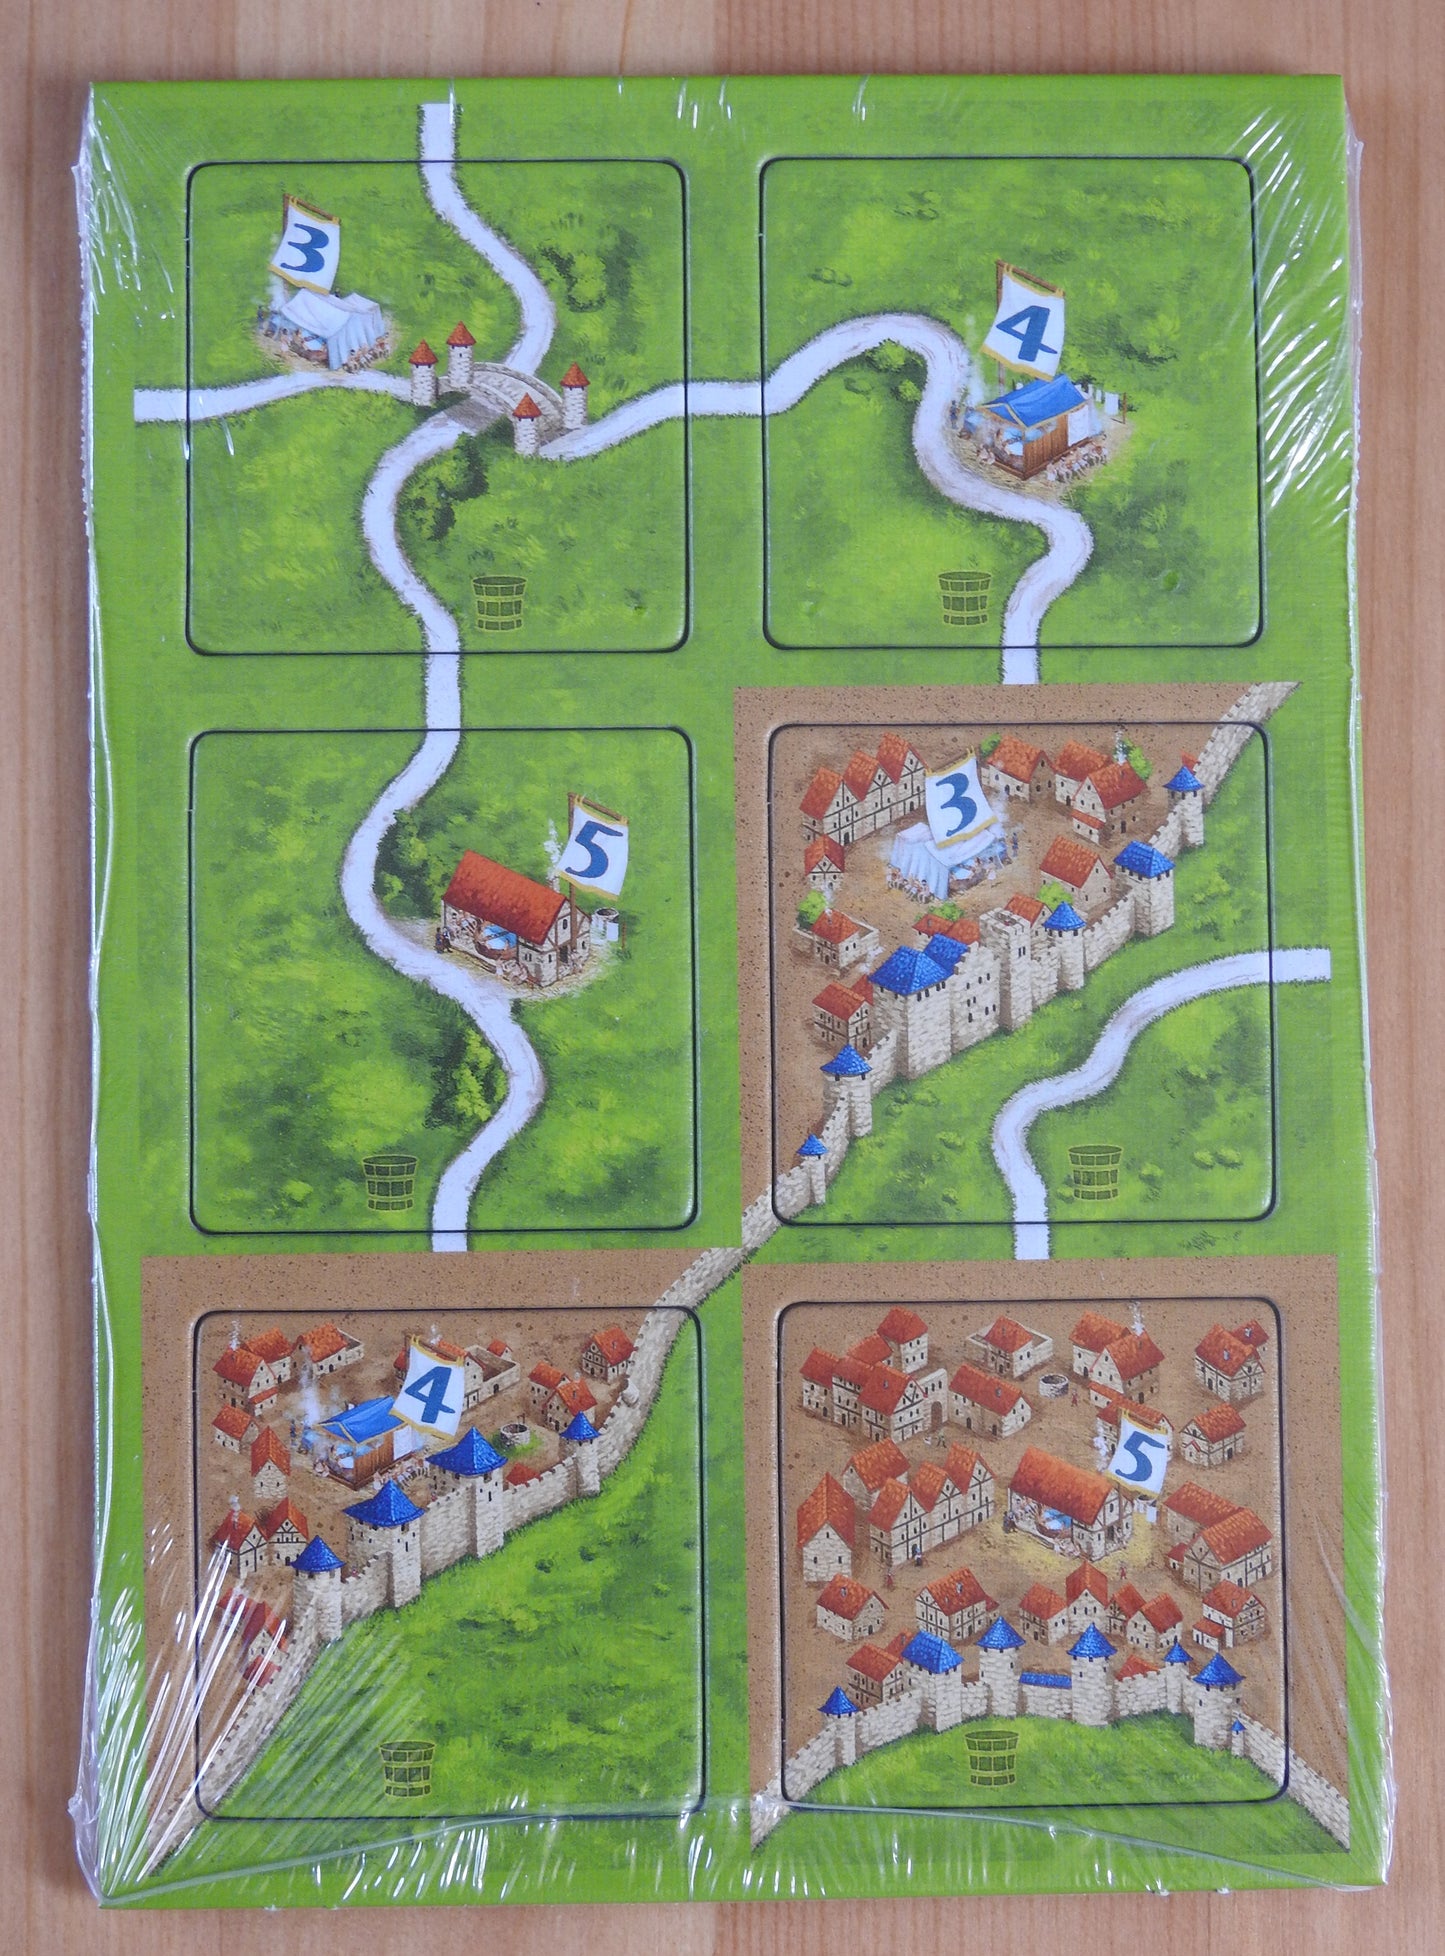 View of the six Carcassonne tiles that come with the Barber Surgeons mini expansion.